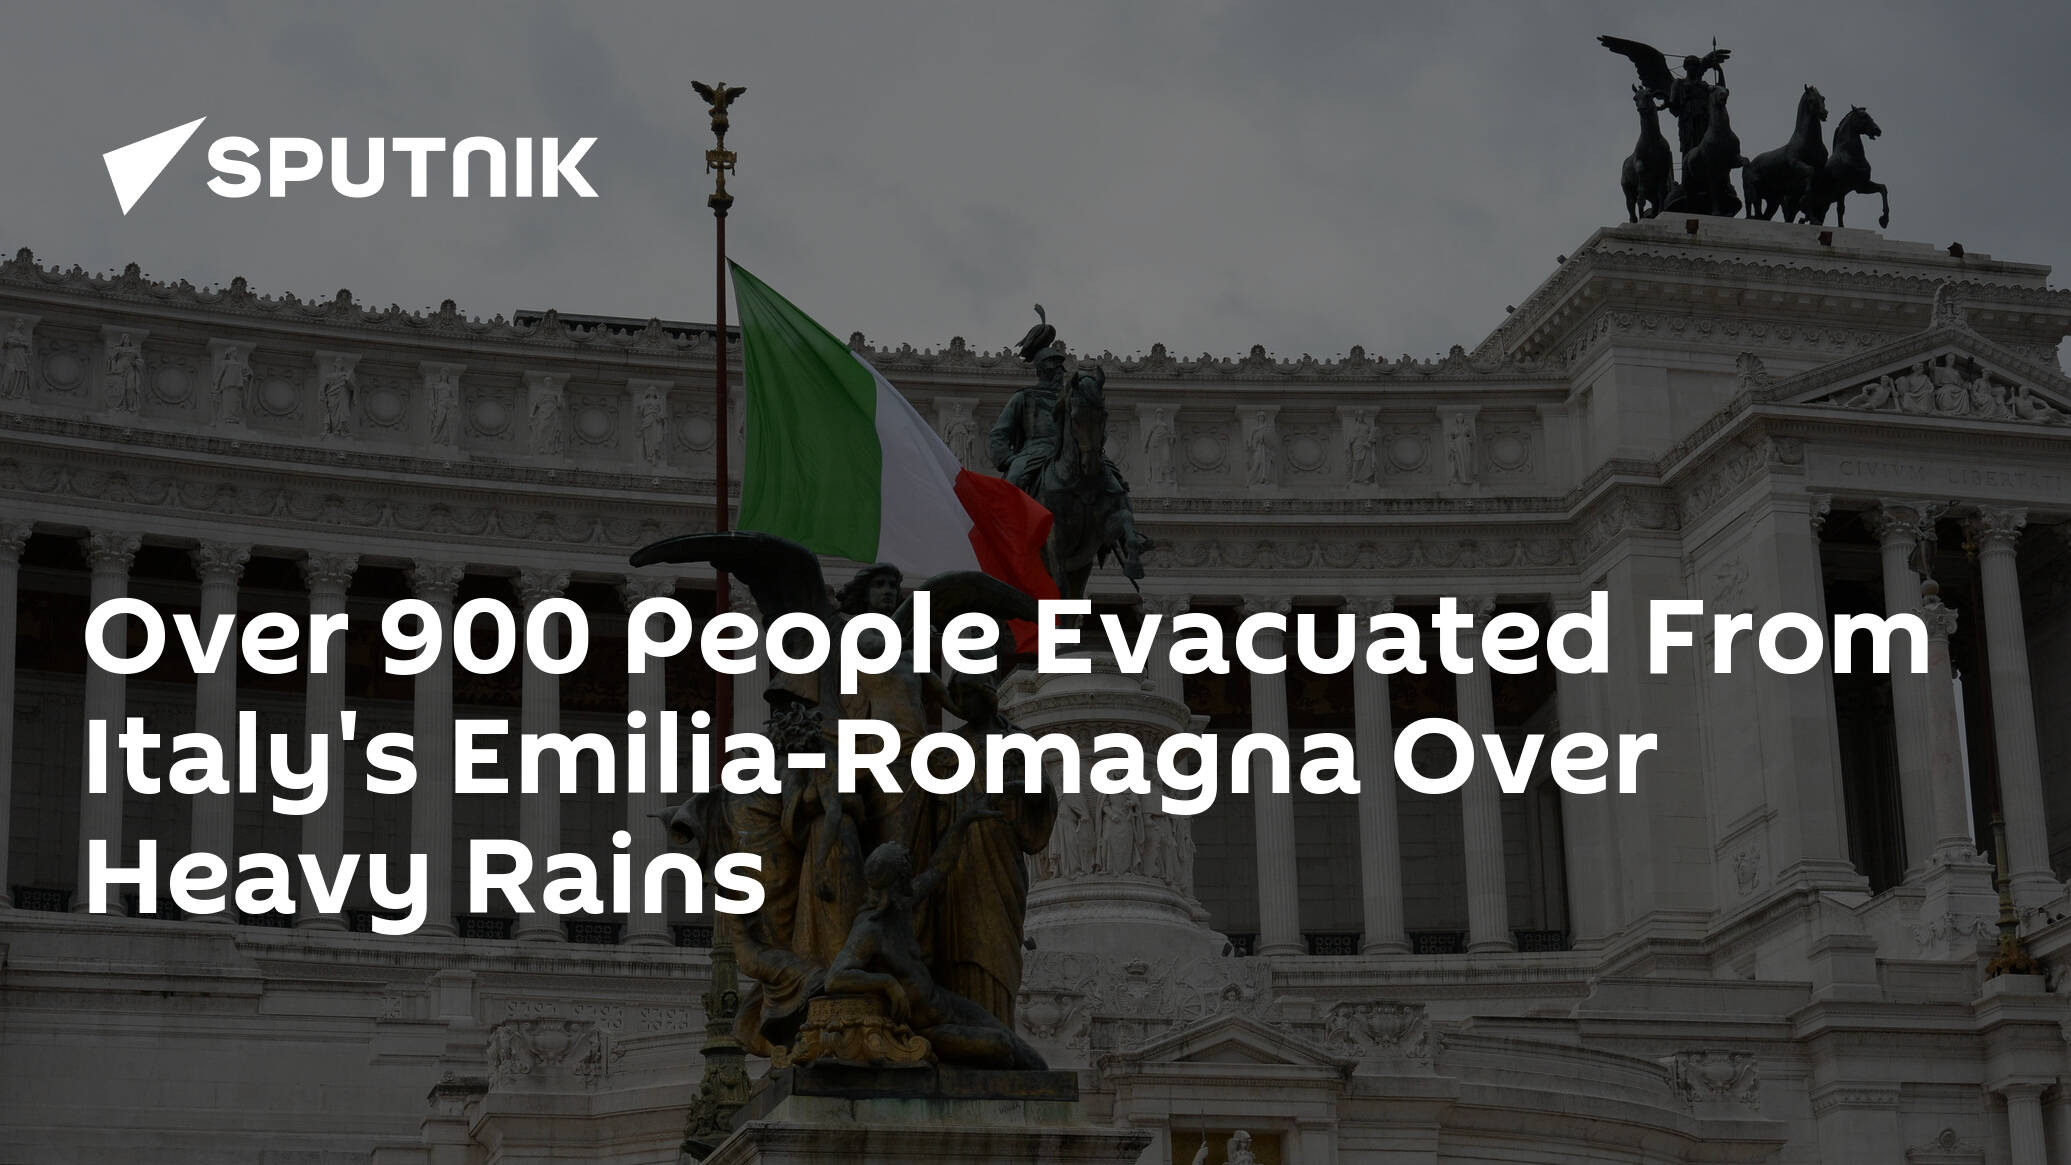 Over 900 People Evacuated From Italy's Emilia-Romagna Over Heavy Rains